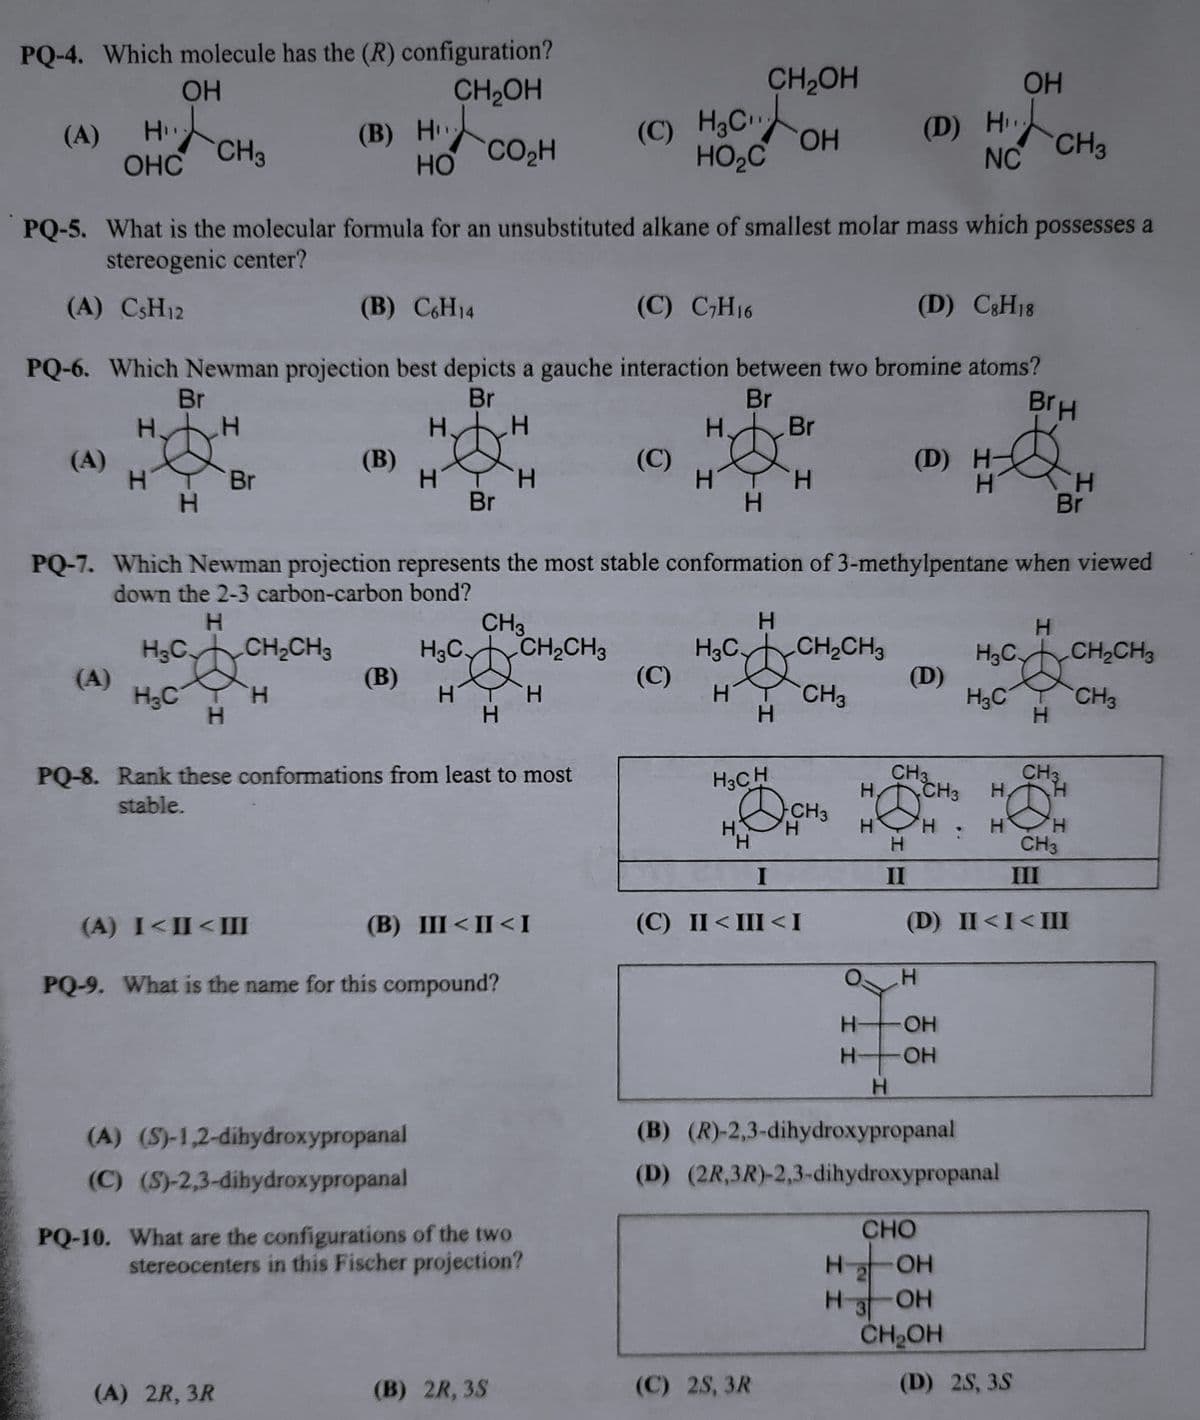 PQ-4. Which molecule has the (R) configuration?
OH
CH₂OH
(A) H
OHC
(A)
(A)
CH₂
HT Br
H
H₂C
PQ-5. What is the molecular formula for an unsubstituted alkane of smallest molar mass which possesses a
stereogenic center?
(A) CsH12
H₂C
(B) C6H14
(C) C₂H16
(D) C8H18
PQ-6. Which Newman projection best depicts a gauche interaction between two bromine atoms?
Br
BrH
Br
Br
H. Br
H. H
H
H
(B) H
H
CH₂CH3
H
(B)
HO
(A) 2R, 3R
(B)
H.
(A) (S)-1,2-dihydroxypropanal
(C) (S)-2,3-dihydroxypropanal
CO₂H
H
Br
H3C.
H
PQ-7. Which Newman projection represents the most stable conformation of 3-methylpentane when viewed
down the 2-3 carbon-carbon bond?
H
CH3
H
H
H
PQ-8. Rank these conformations from least to most
stable.
(A) I<II<III
(B) III <II<I
PQ-9. What is the name for this compound?
CH₂CH3
H
(B) 2R, 3S
(C) H3C₁
HO₂C
PQ-10. What are the configurations of the two
stereocenters in this Fischer projection?
(C)
(C)
H3C
H
H
CH₂OH
OH
H.
'Н
H3CH
H
H
(C) 2S, 3R
CH₂CH3
CH3
CH3
OH
(1) HCH₂
NC
H
I
(C) II < III <I
(D) H
(D)
H
CH3
H. CH3 H.
H8
H
H
II
H
H3C.
H
OH
H-OH
H
H3C
CHO
OH
H-
2
H 3 OH
CH₂OH
I
H
(B) (R)-2,3-dihydroxypropanal
(D) (2R,3R)-2,3-dihydroxypropanal
H
H
III
(D) II<I<III
(D) 2S, 3S
Br
CH3
@
CH3
H
H
H
CH₂CH3
CH3